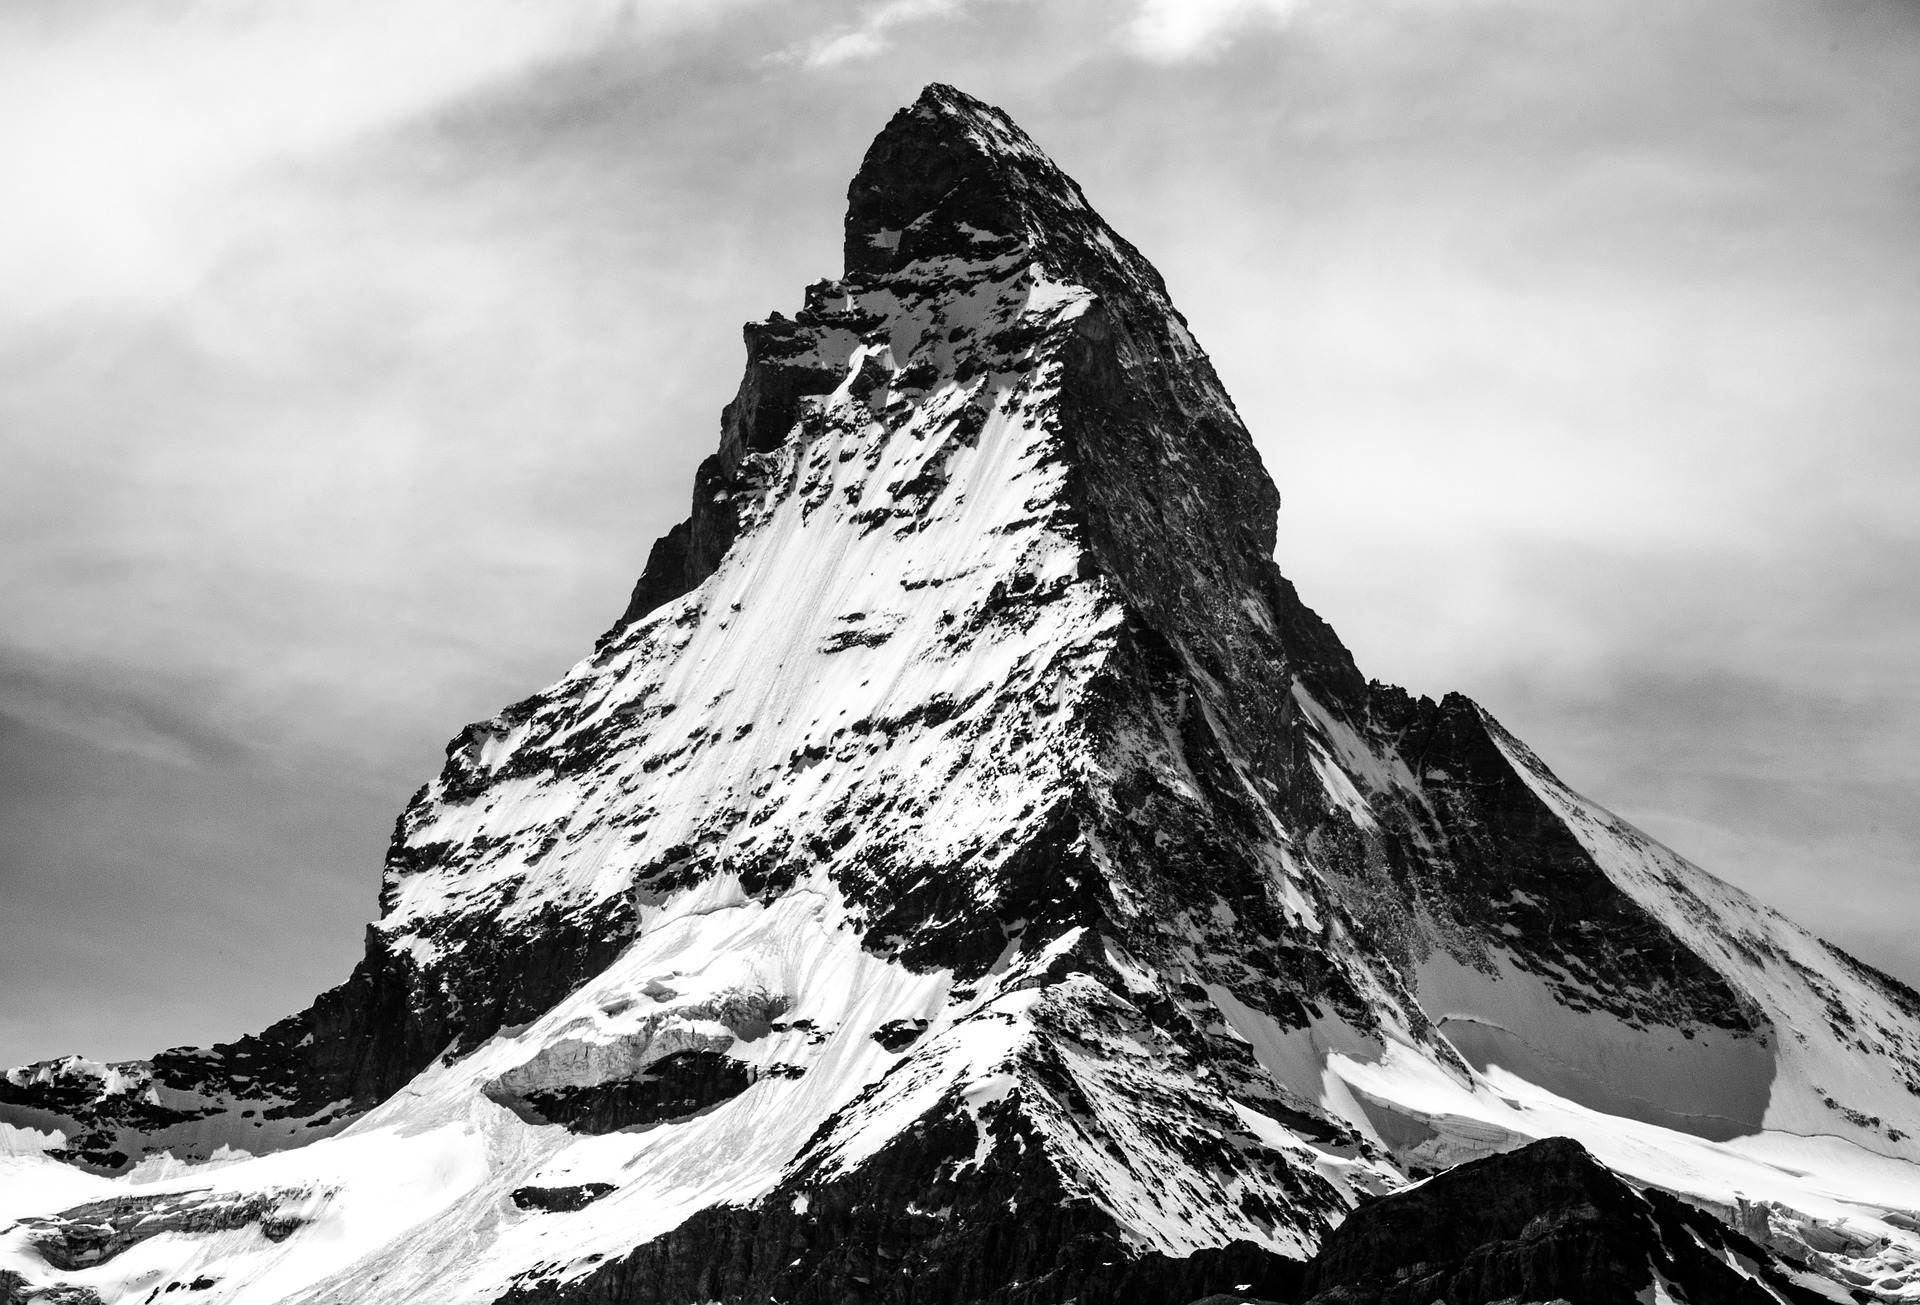 Black and white picture of a mountain top, the Matterhorn in Switzerland